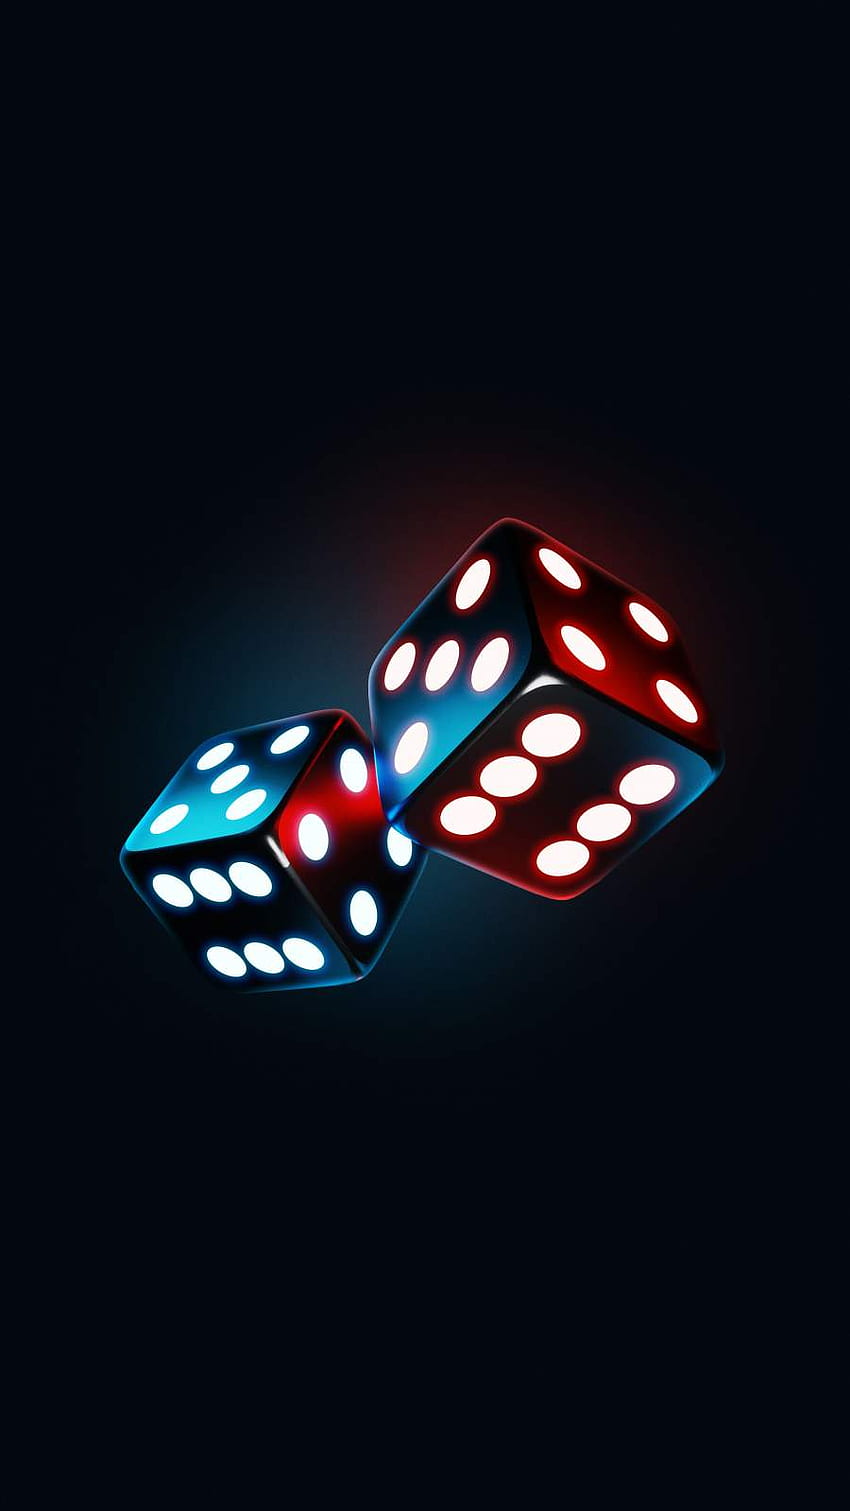 Beautify your Phone with Cool, Cool Dice HD phone wallpaper